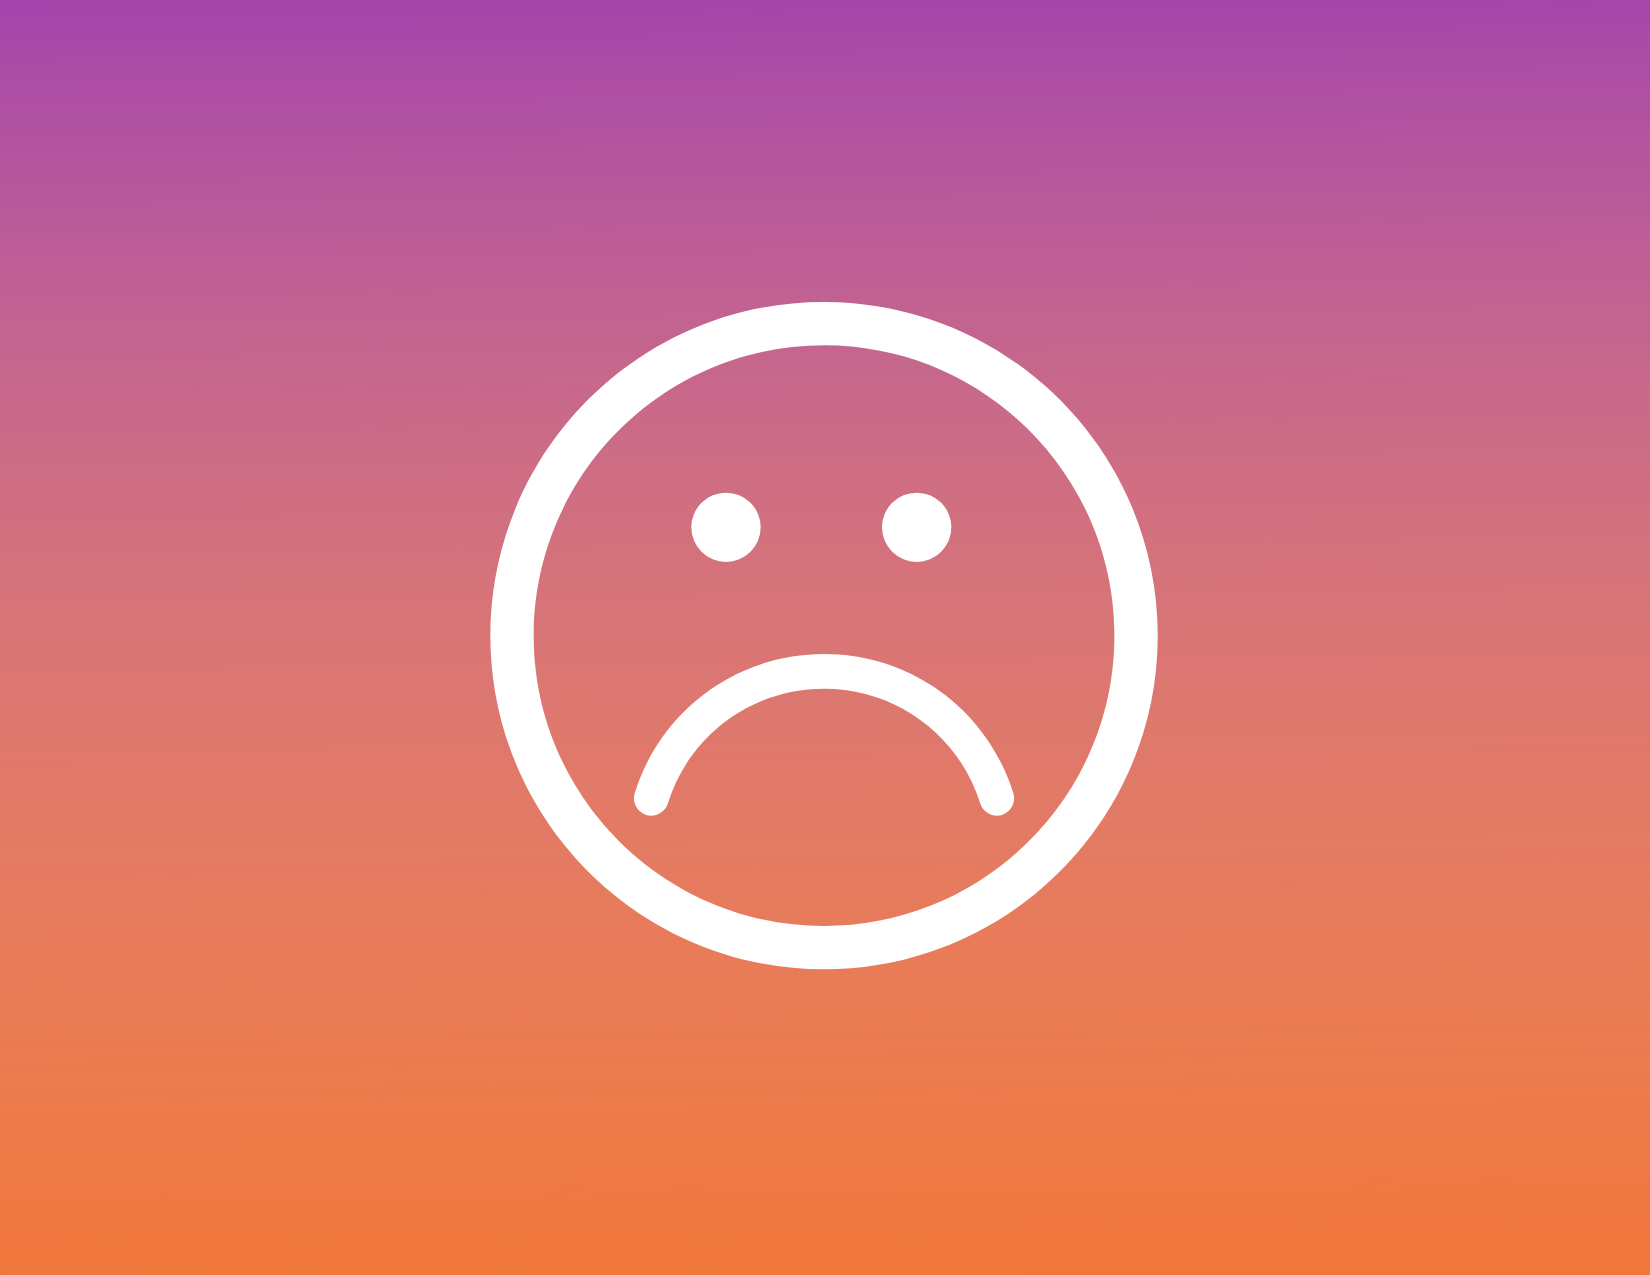 A frowning face emoji on an orange and purple background.